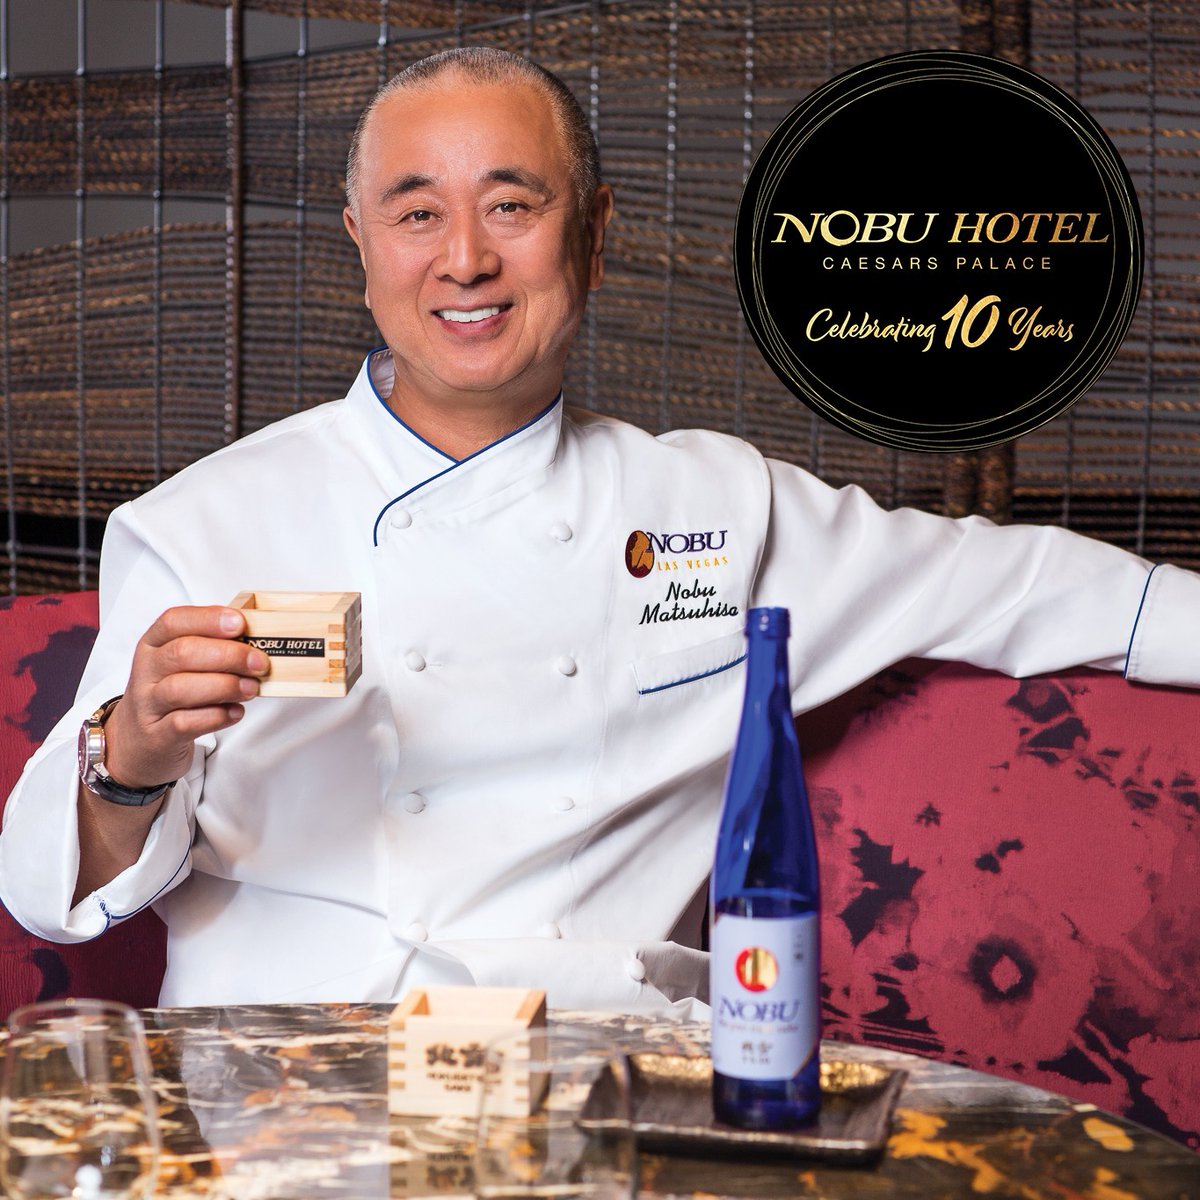 Ten years ago, @CaesarsEnt partnered with Nobu Hospitality to open the world’s first @NobuHotels. To celebrate a decade of success, Chef @therealnobu returns to host an exclusive event on Friday, Oct. 27 from 5:30 to 7 p.m. at @NobuRestaurants. Tickets bit.ly/45DcIu3